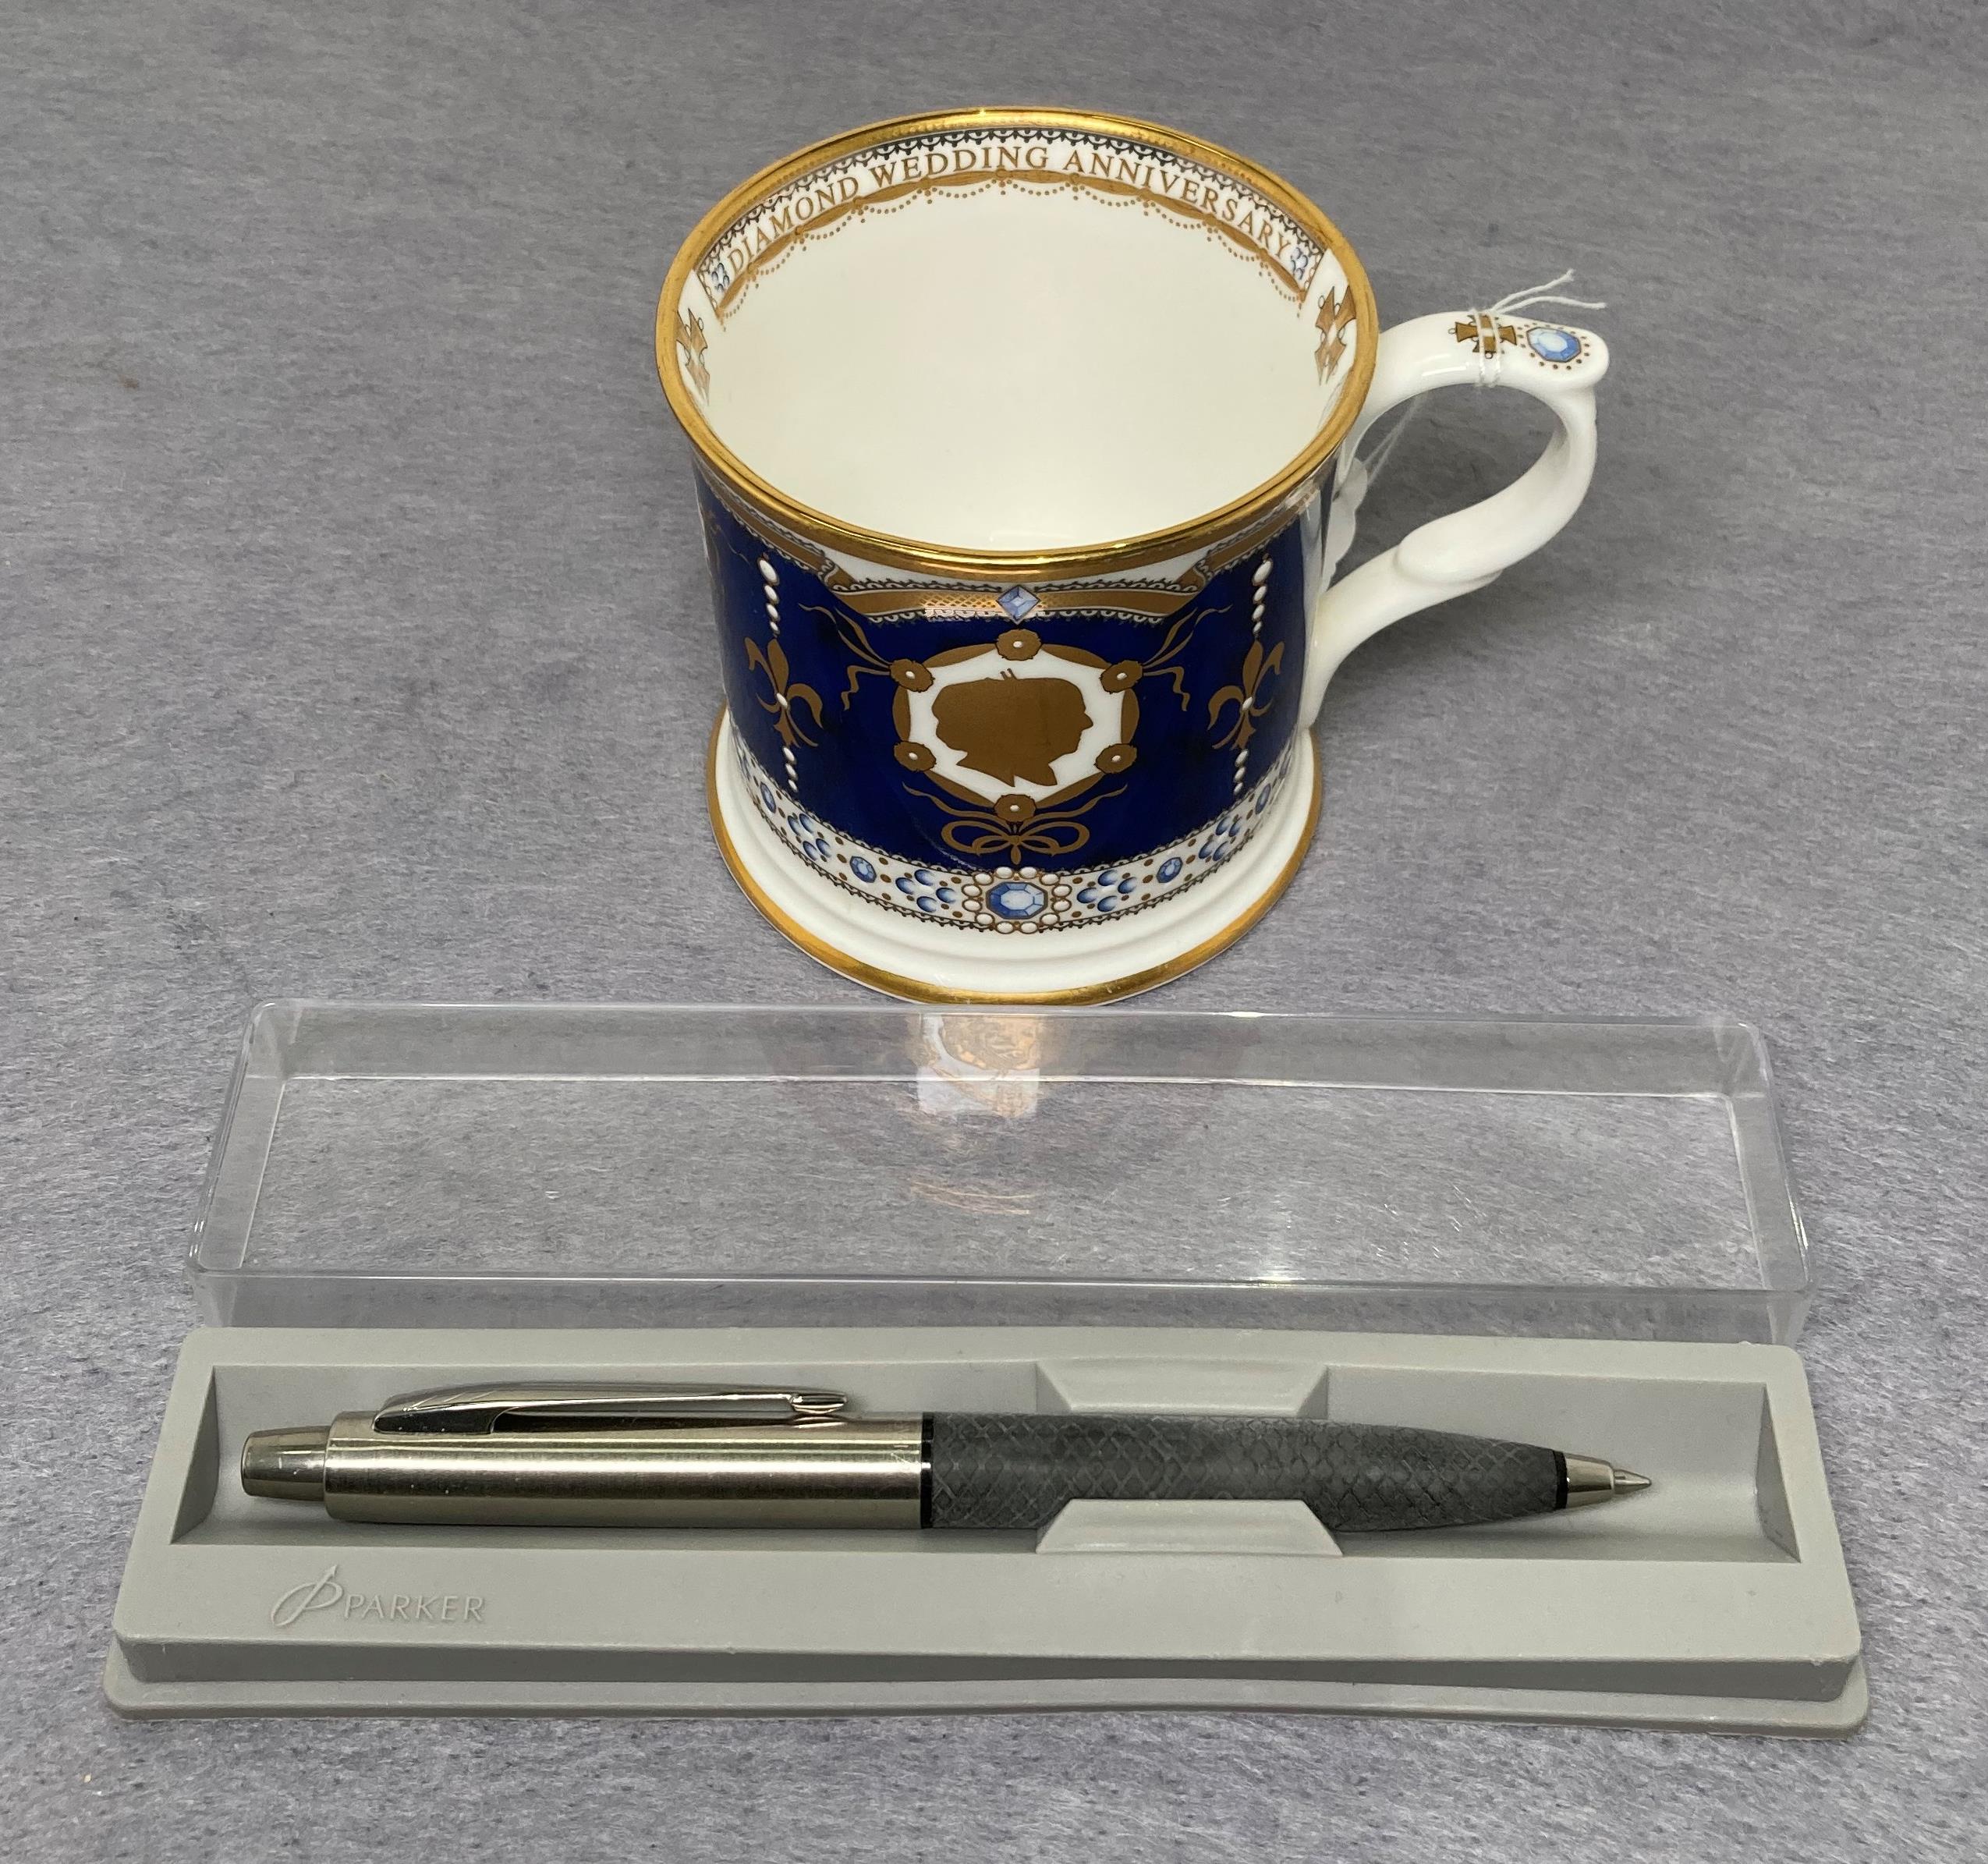 Two items including a Royal Worcester 1947-2007 Diamond Wedding Anniversary cup and a Parker